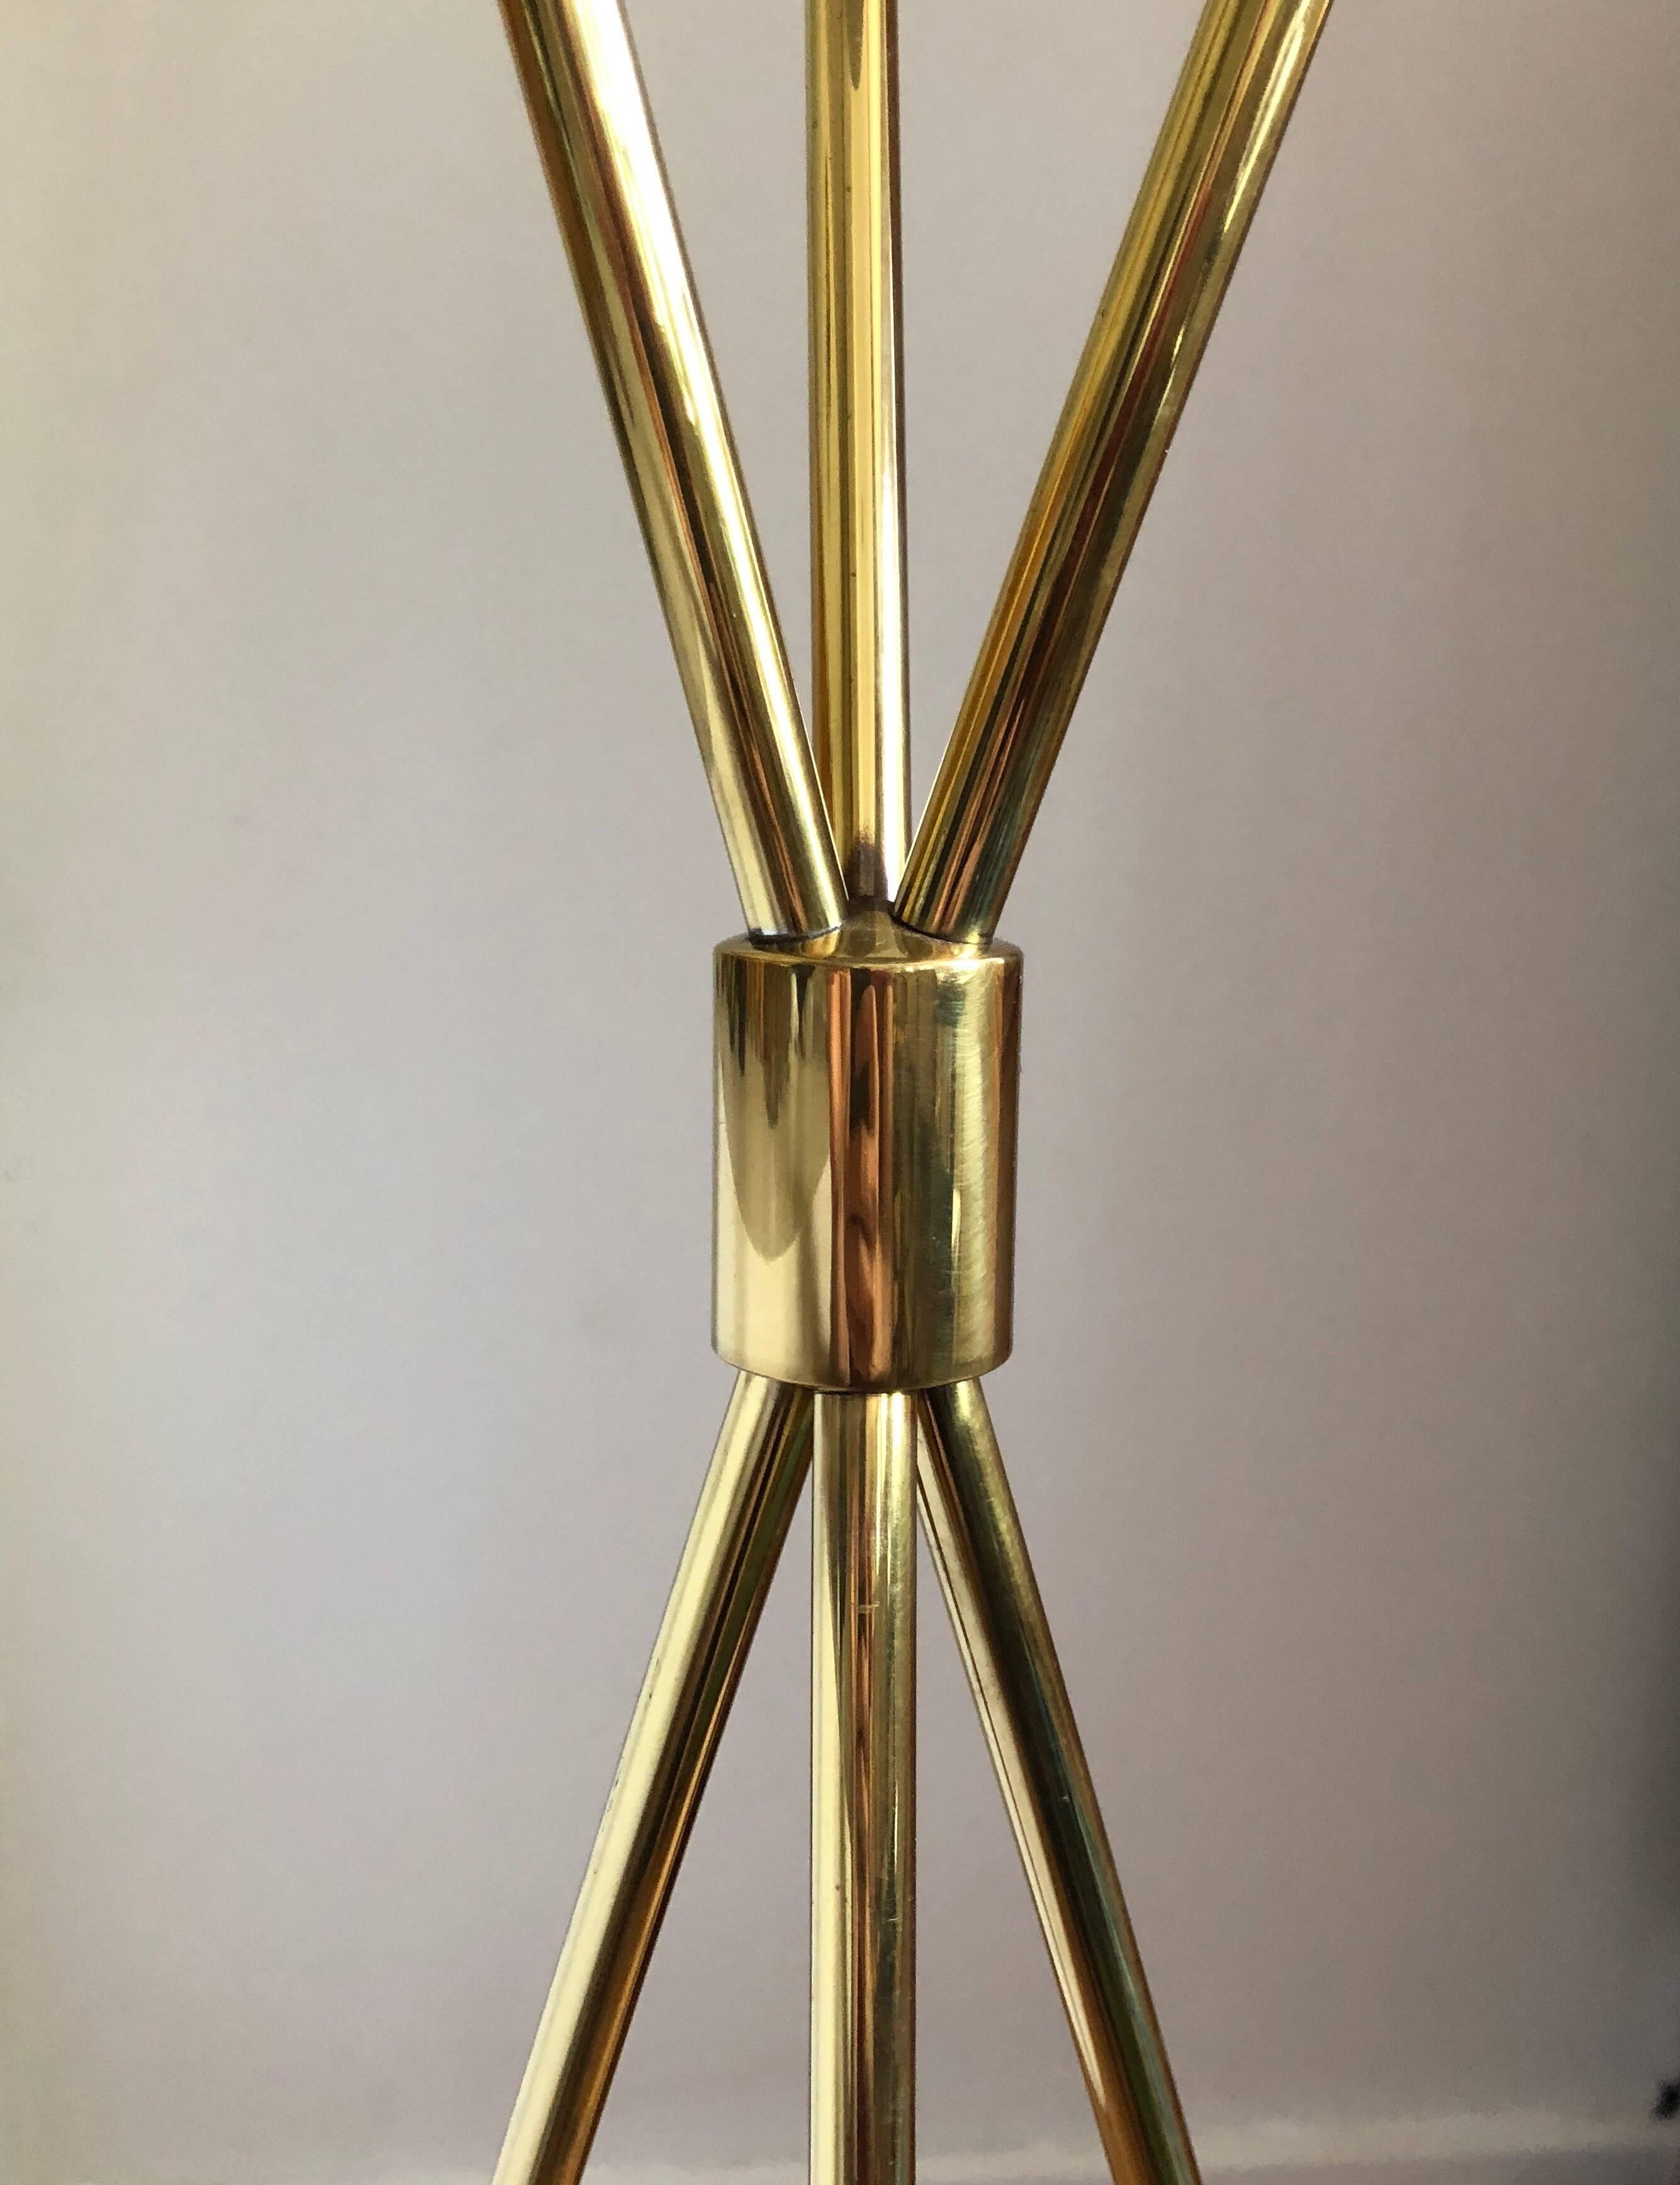 Solid brass tripod floor lamp model 206, first introduced in 1950. This example is likely from the early 1970s and retains a clean, tarnish-free high-polish brass finish with a light golden patina.